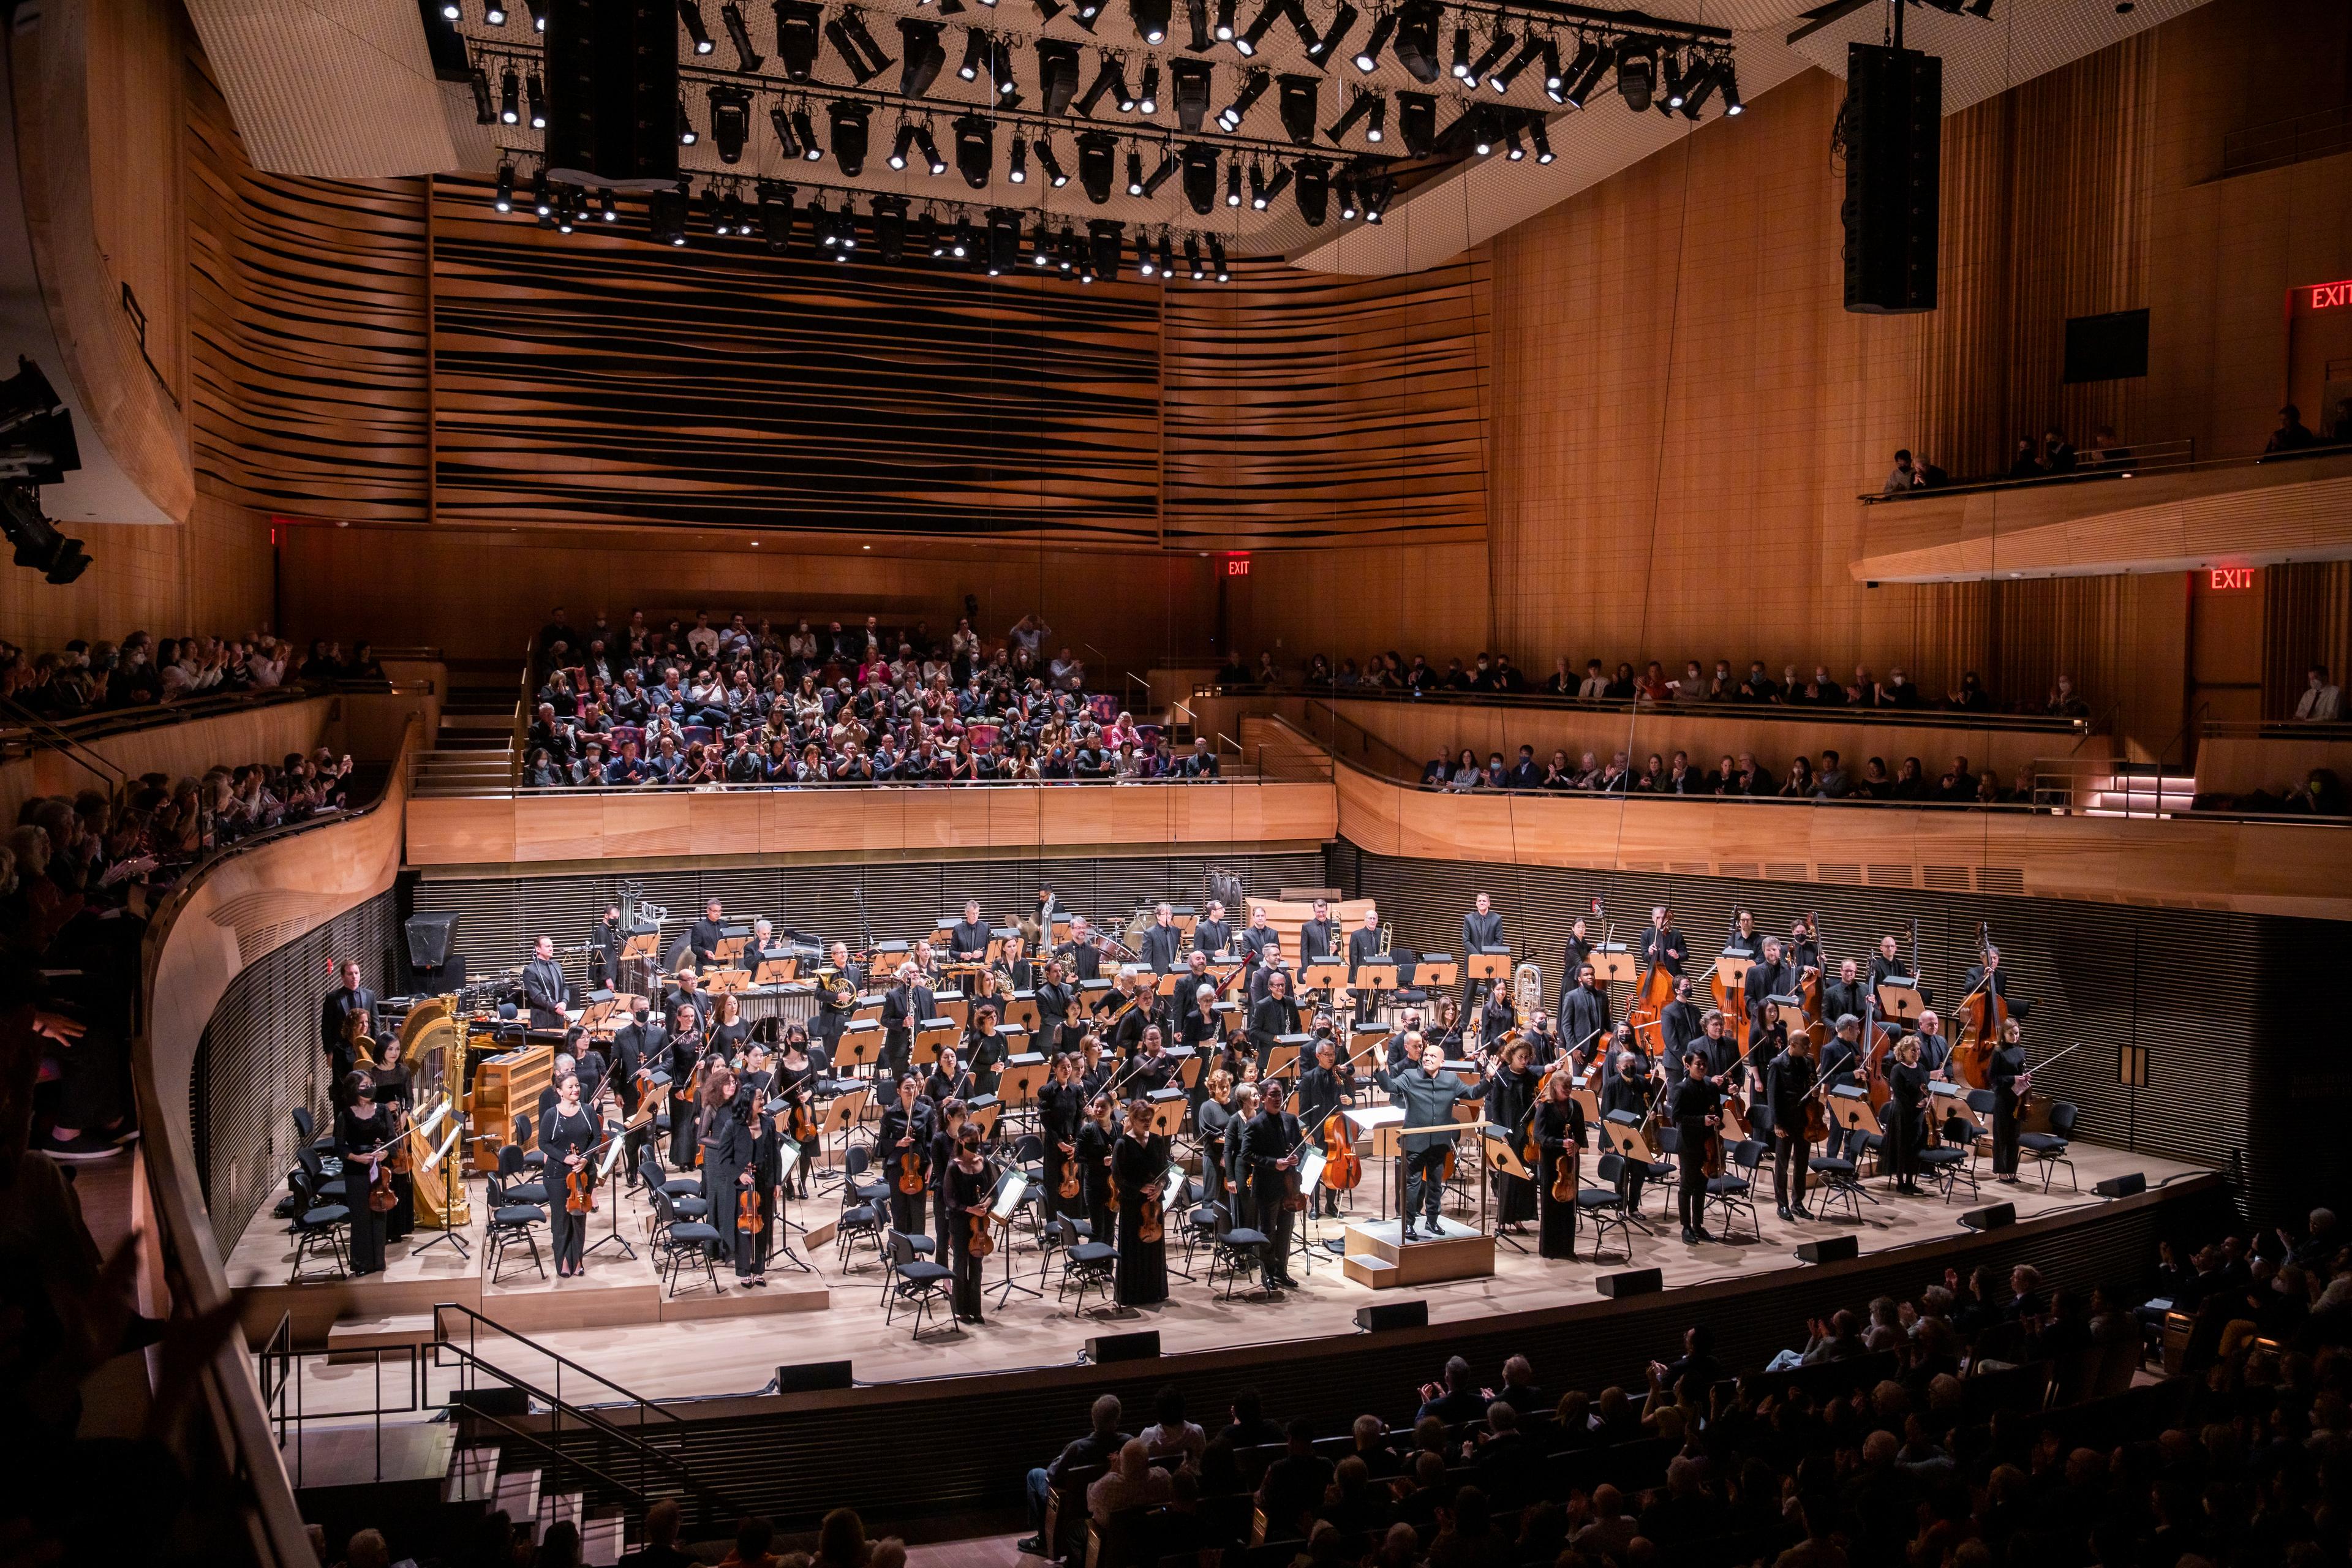 Musicians of the New York Philharmonic on stage